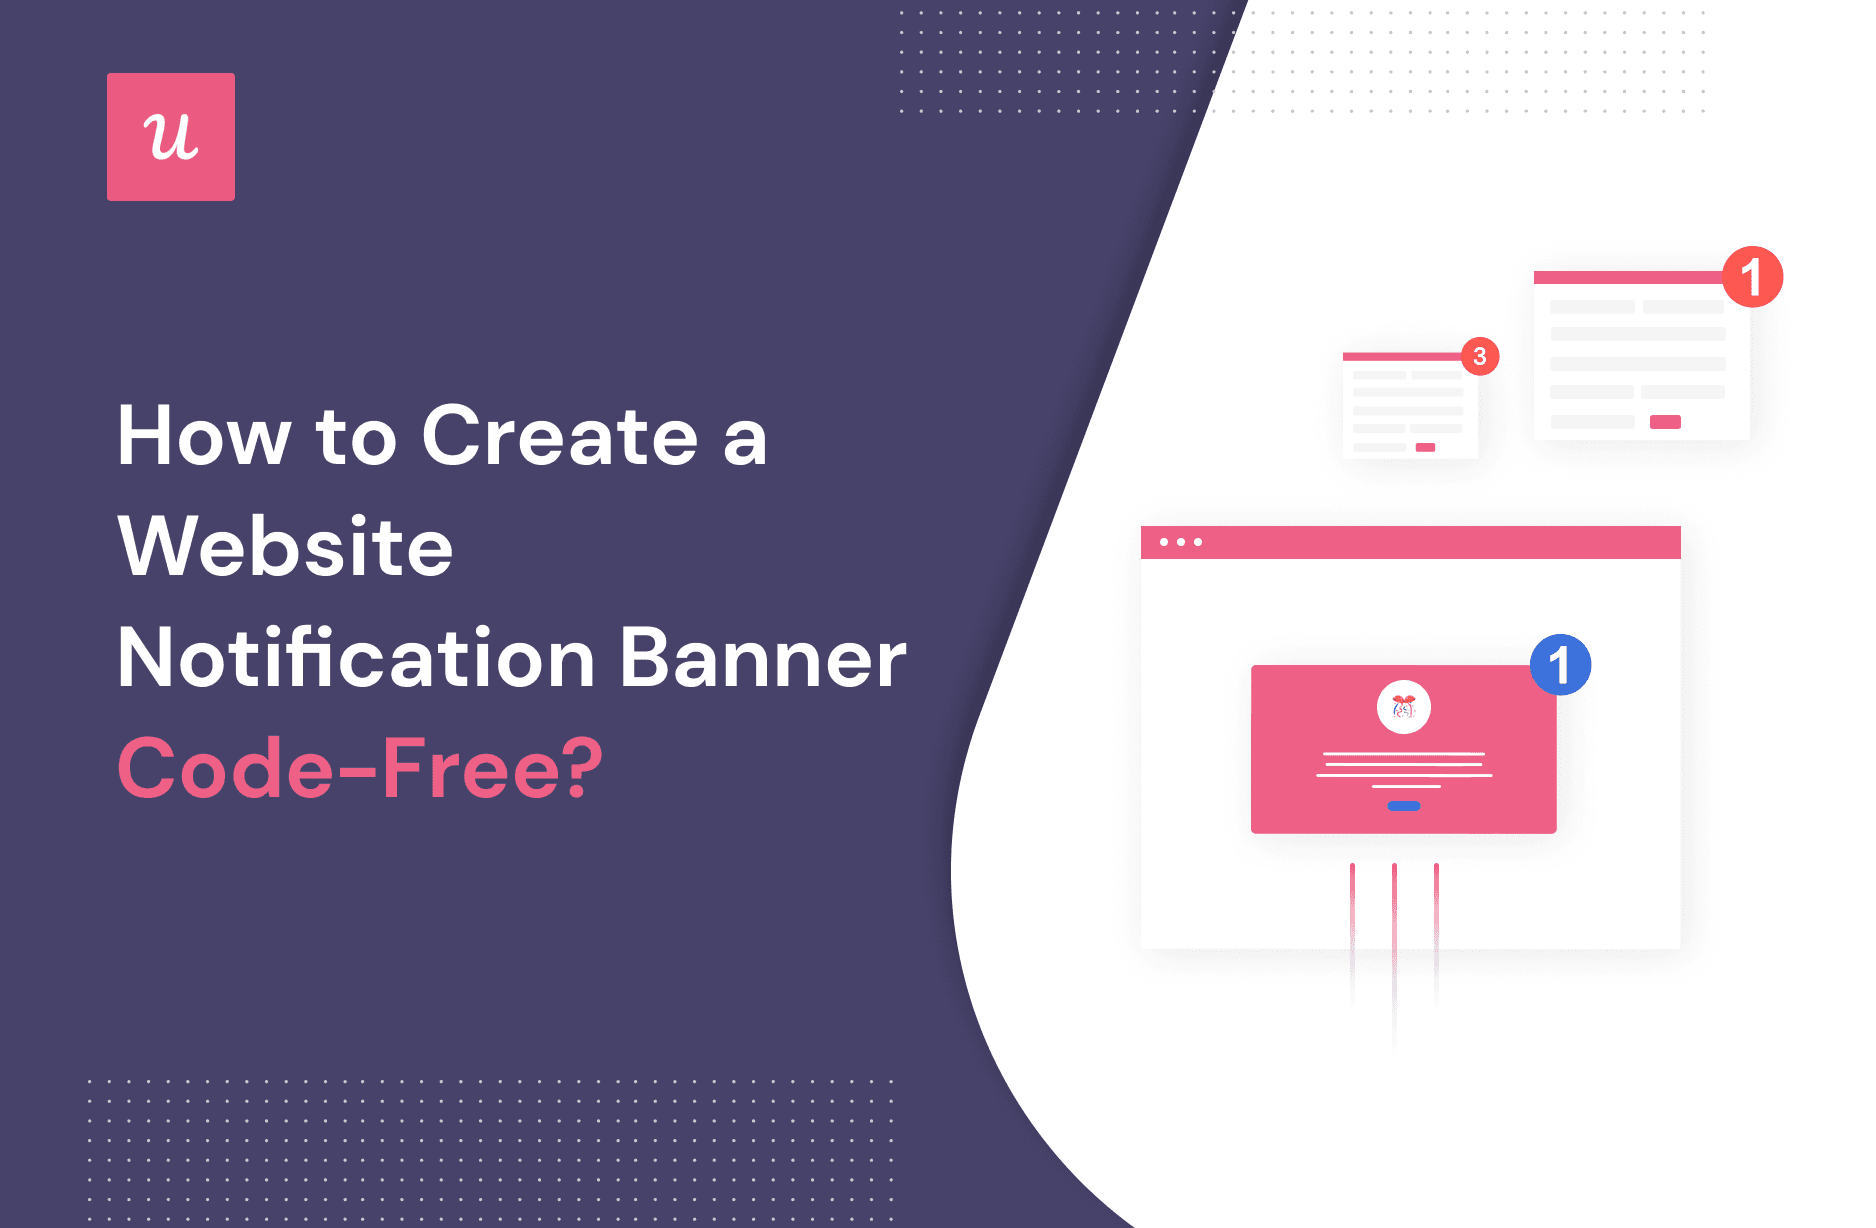 How To Create a Website Notification Banner Code-Free? [+ 3 Best Practices]